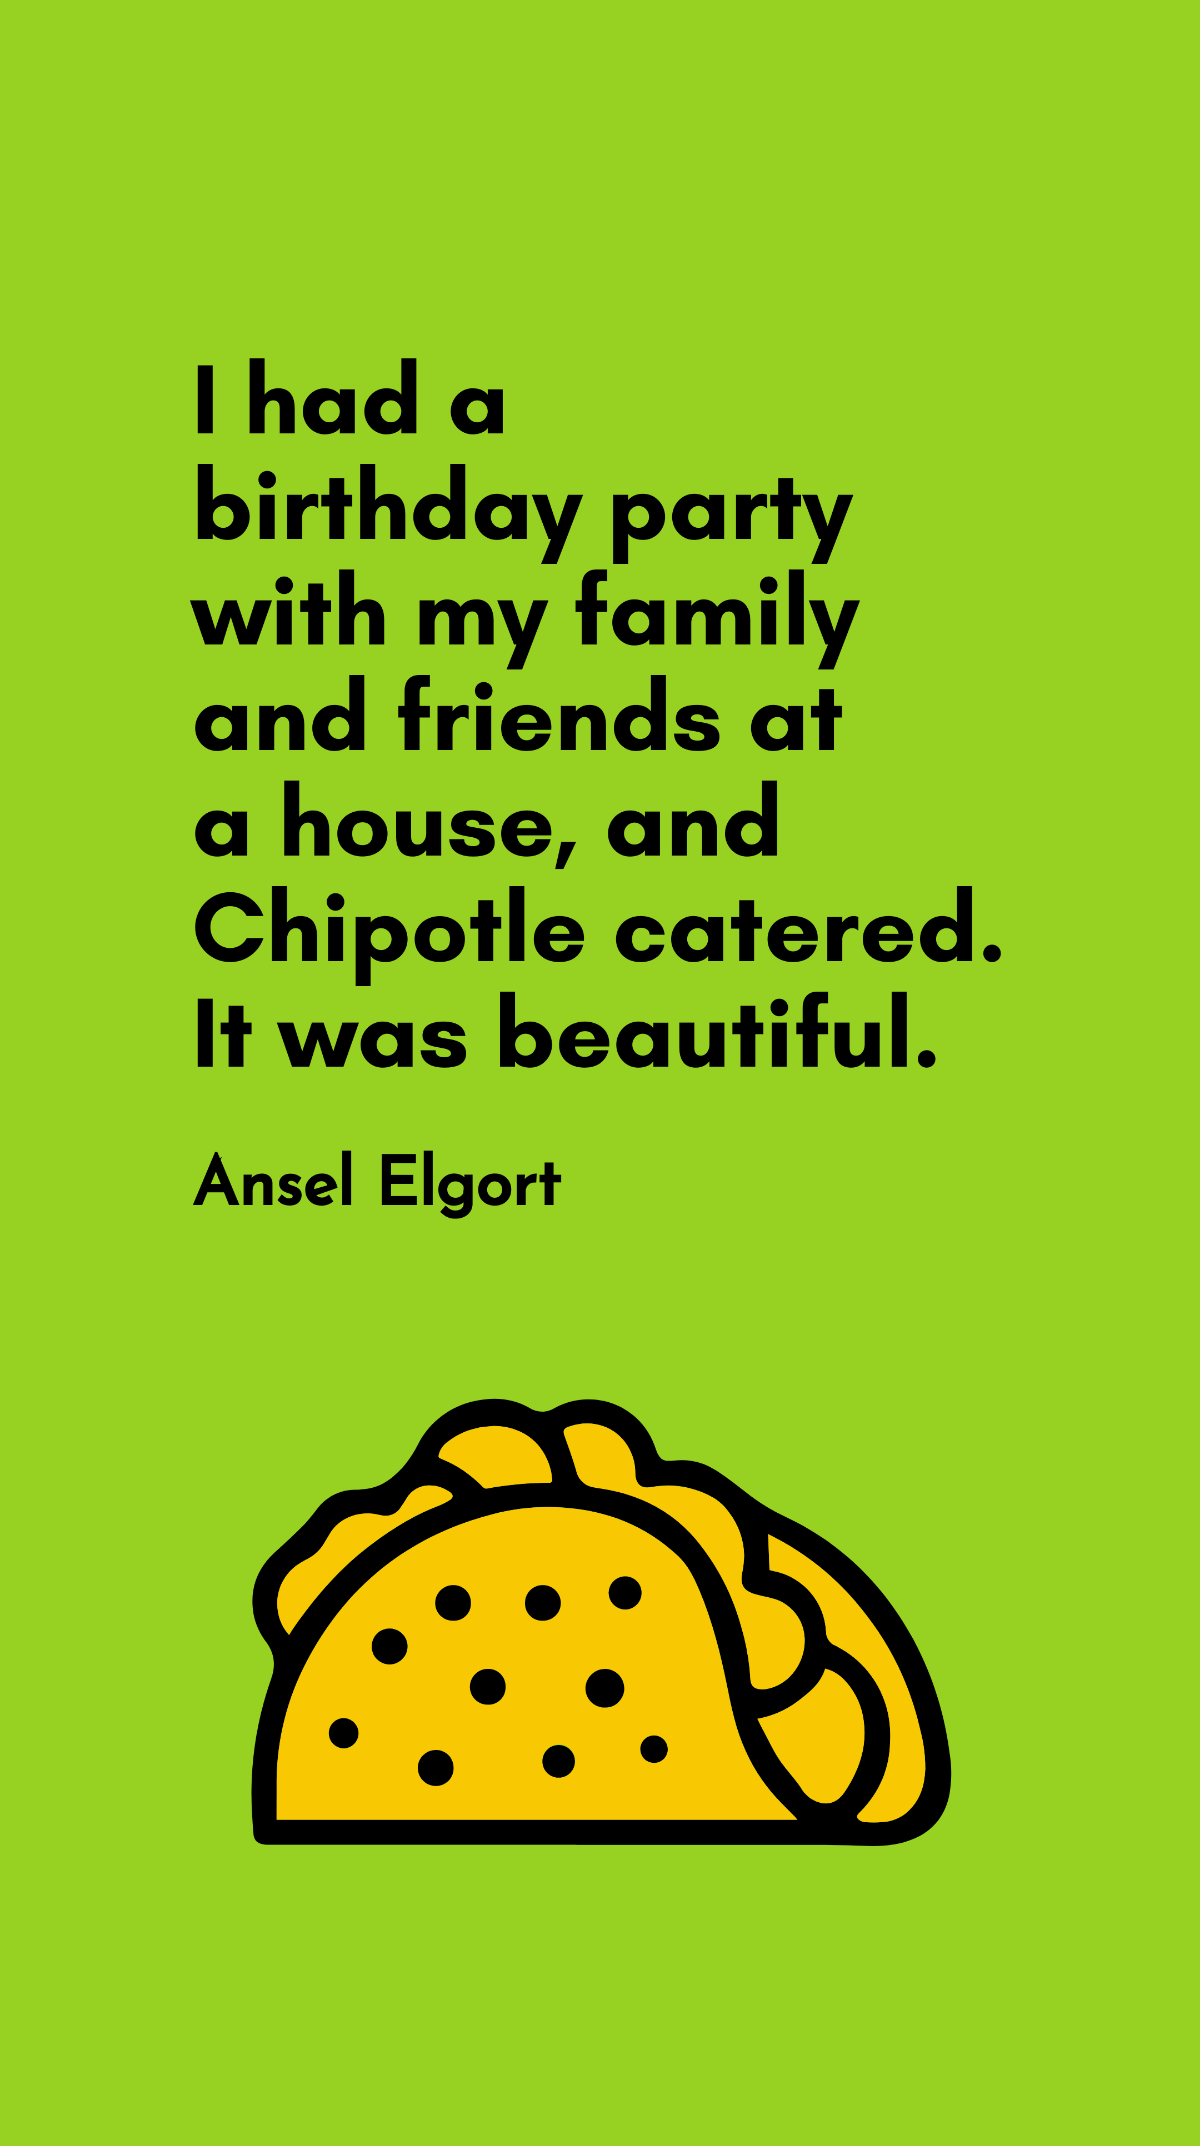 Ansel Elgort - I had a birthday party with my family and friends at a house, and Chipotle catered. It was beautiful.